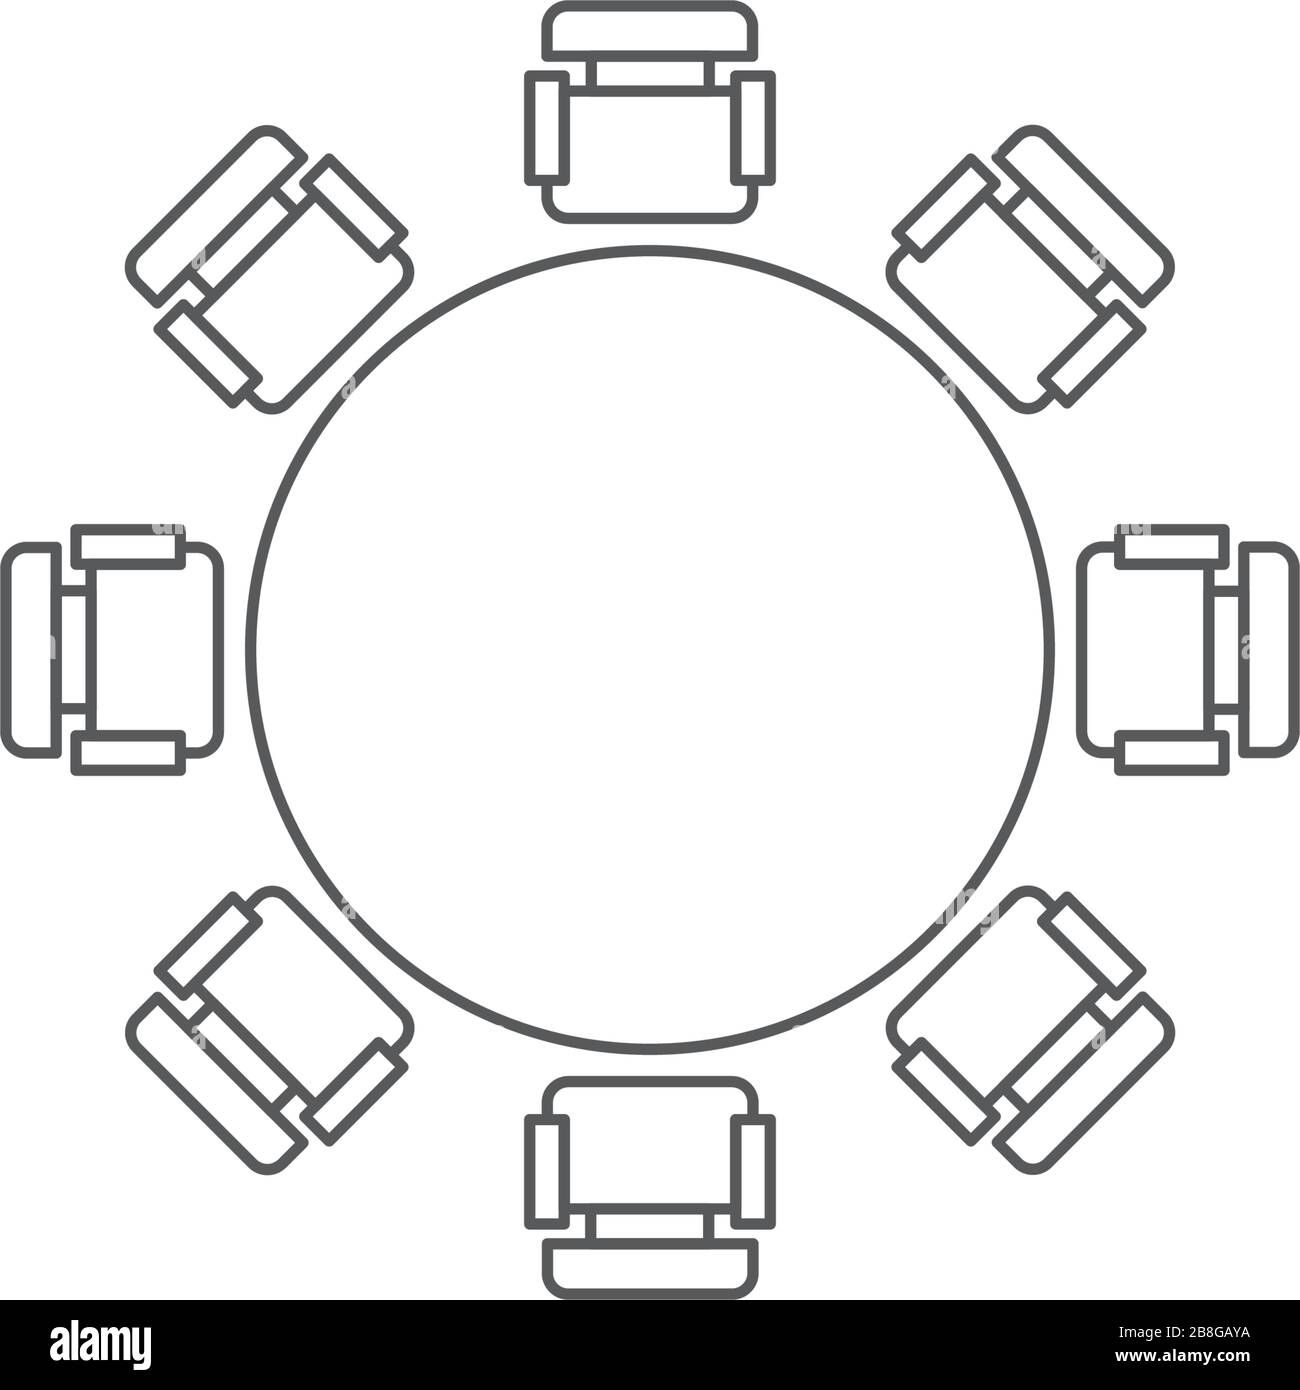 Round table and chairs top view vector icon isolated on white background Stock Vector